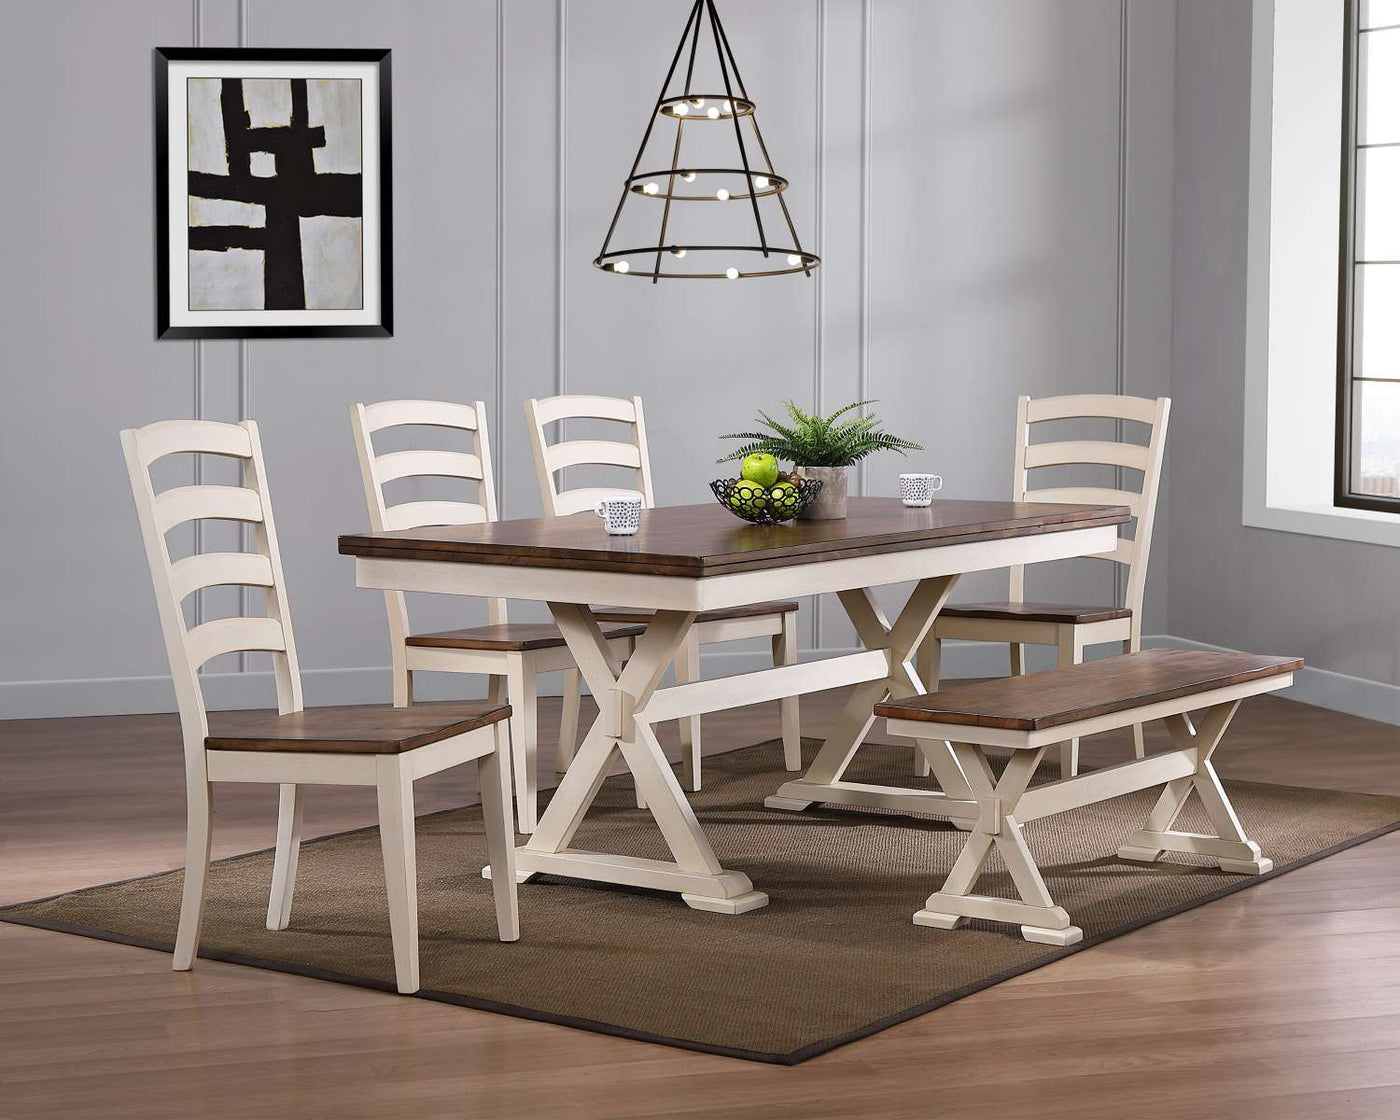 Mariana Dining Chair - Antique White, Brown